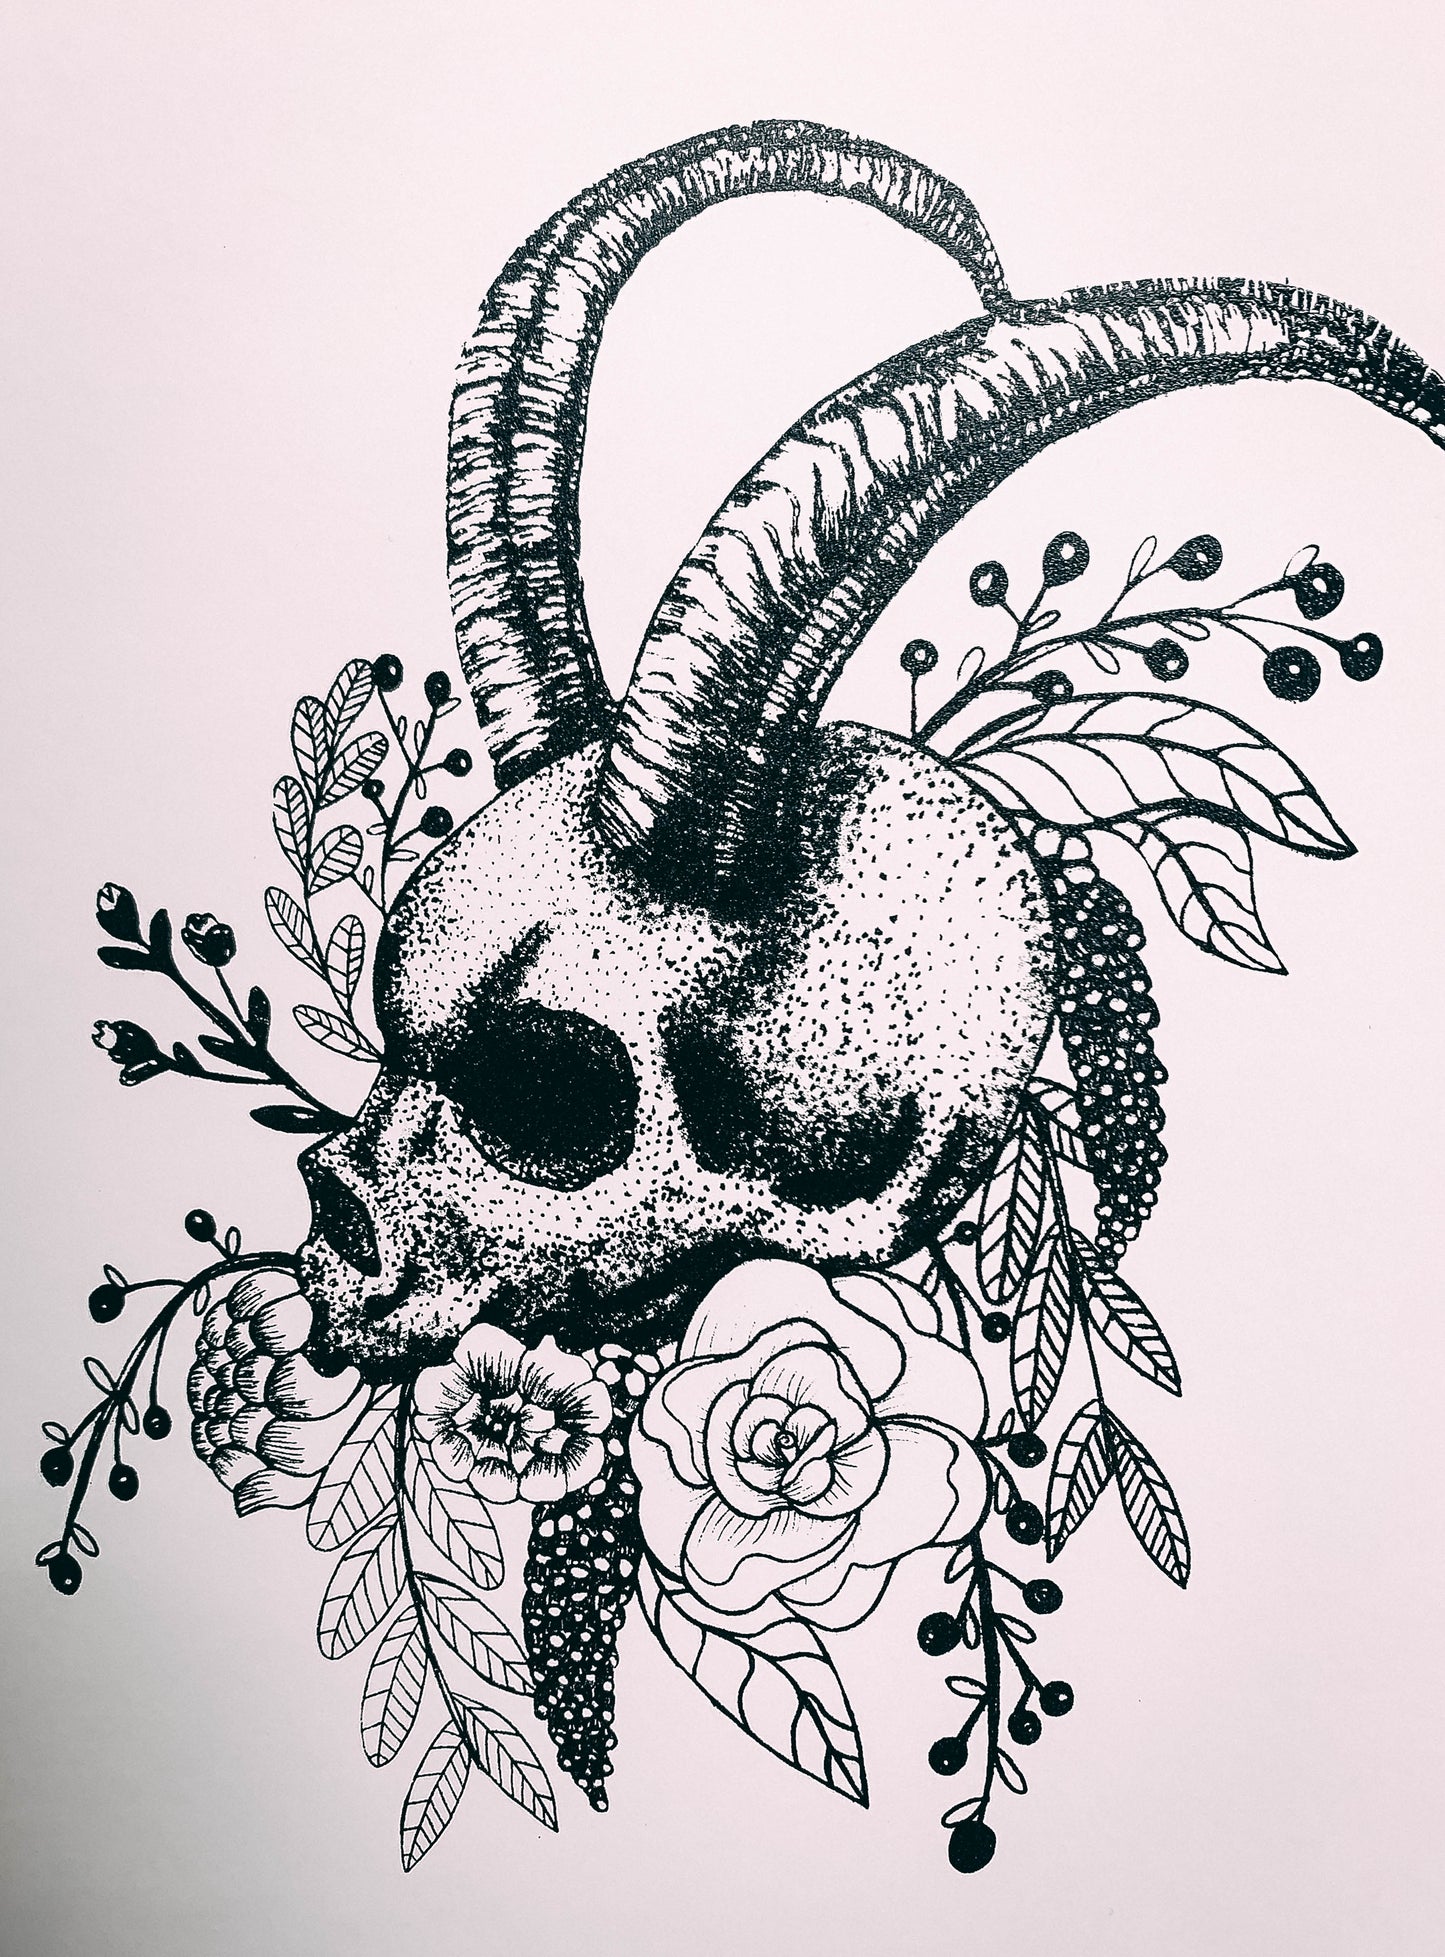 Skull With Horns surrounded by botanicals - A4 Screen Print by Wayward